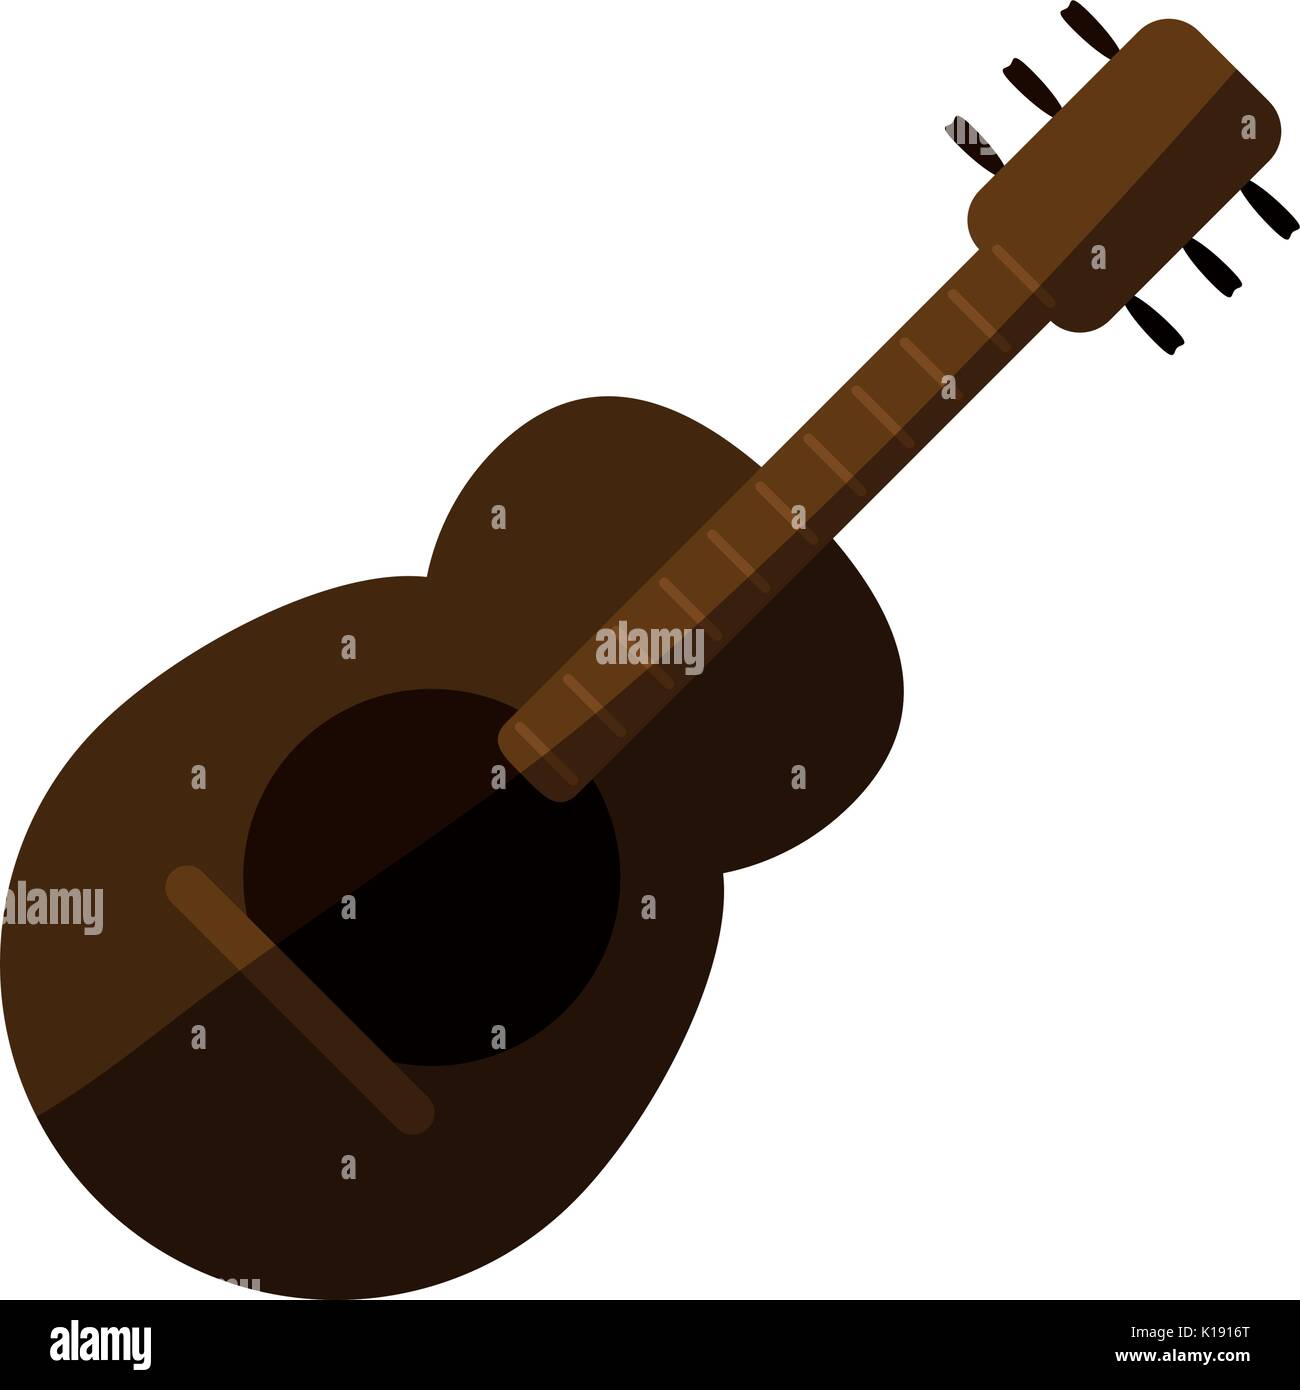 acoustic guitar icon image Stock Vector